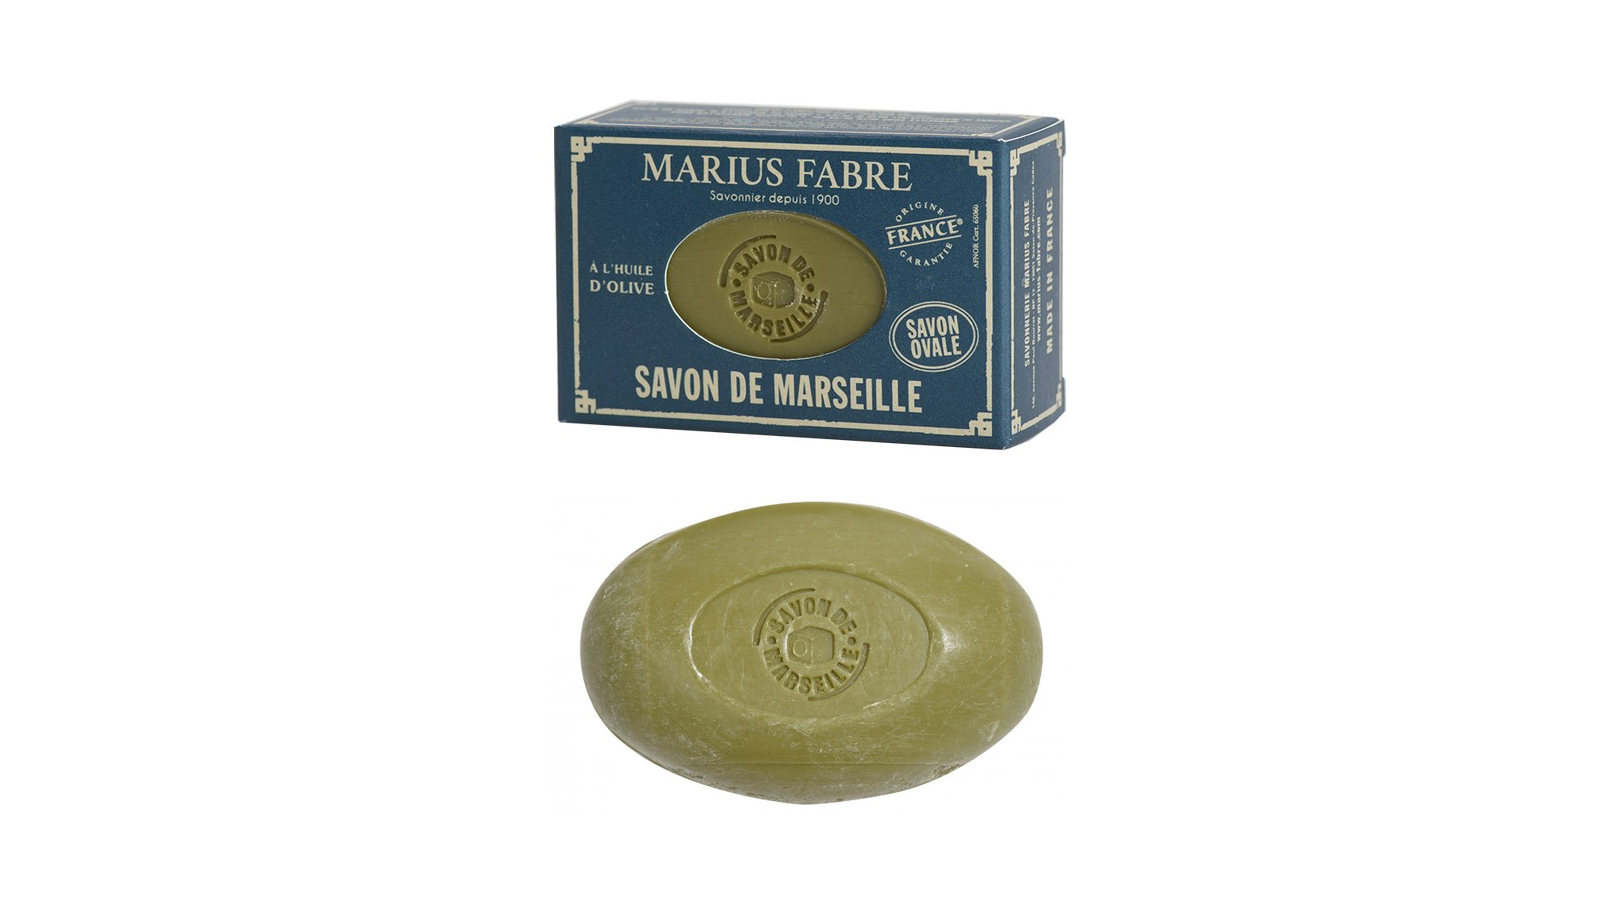 Green Marseille olive oil soap NATURE 150g in its box